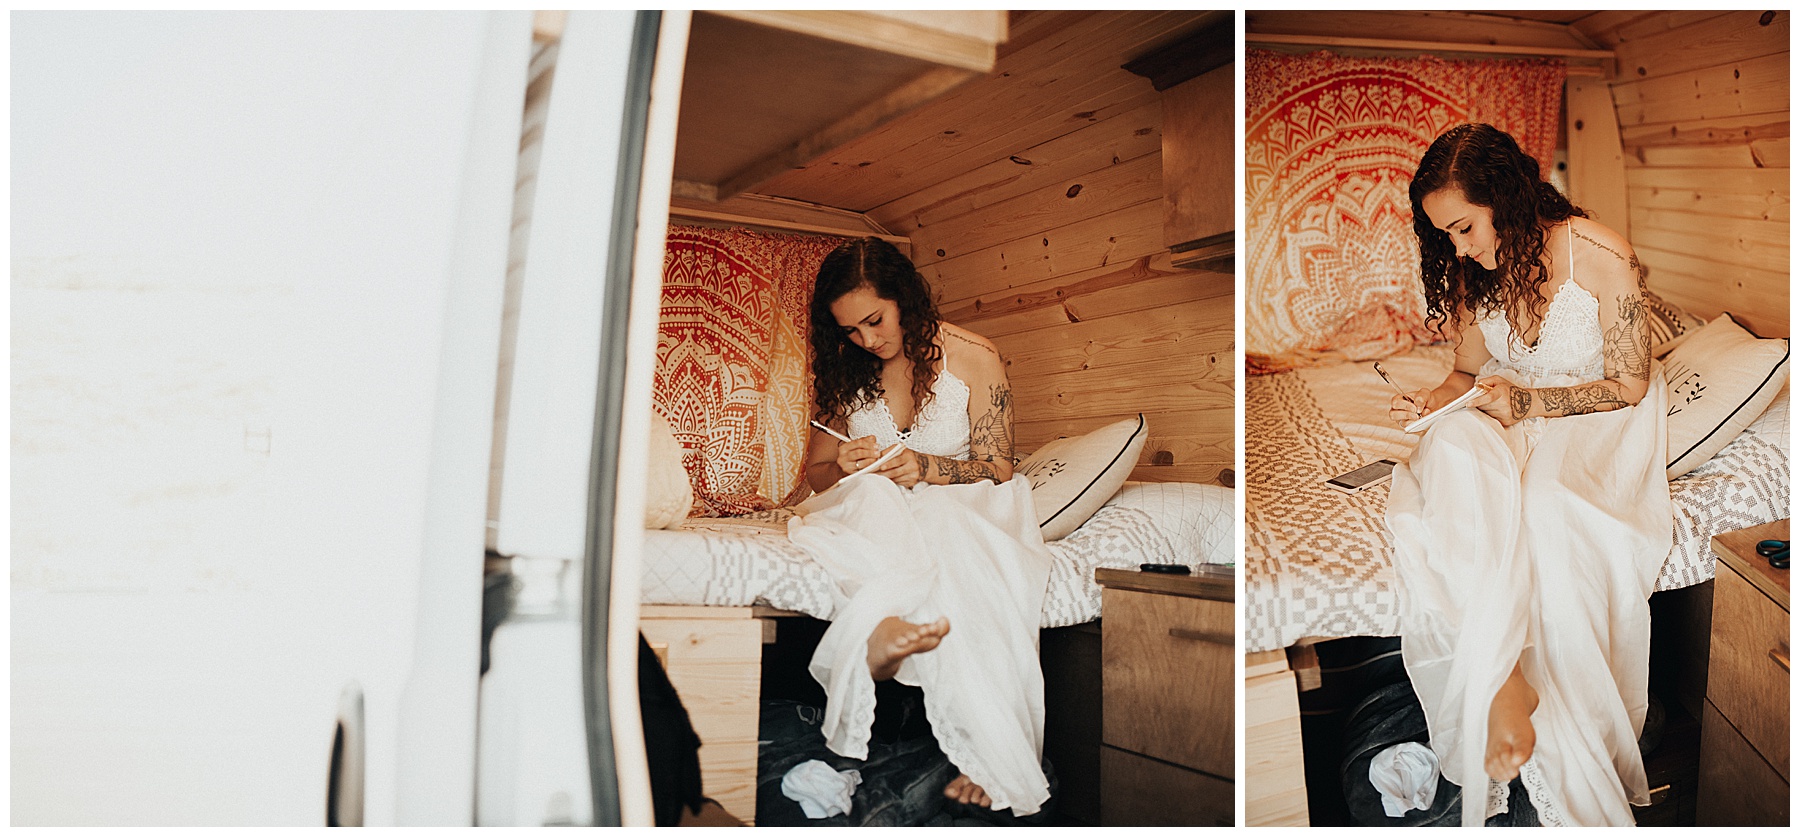 Writing letters to each other before the elopement | Juju Photography - California, San Francisco & Destination wedding photographer 